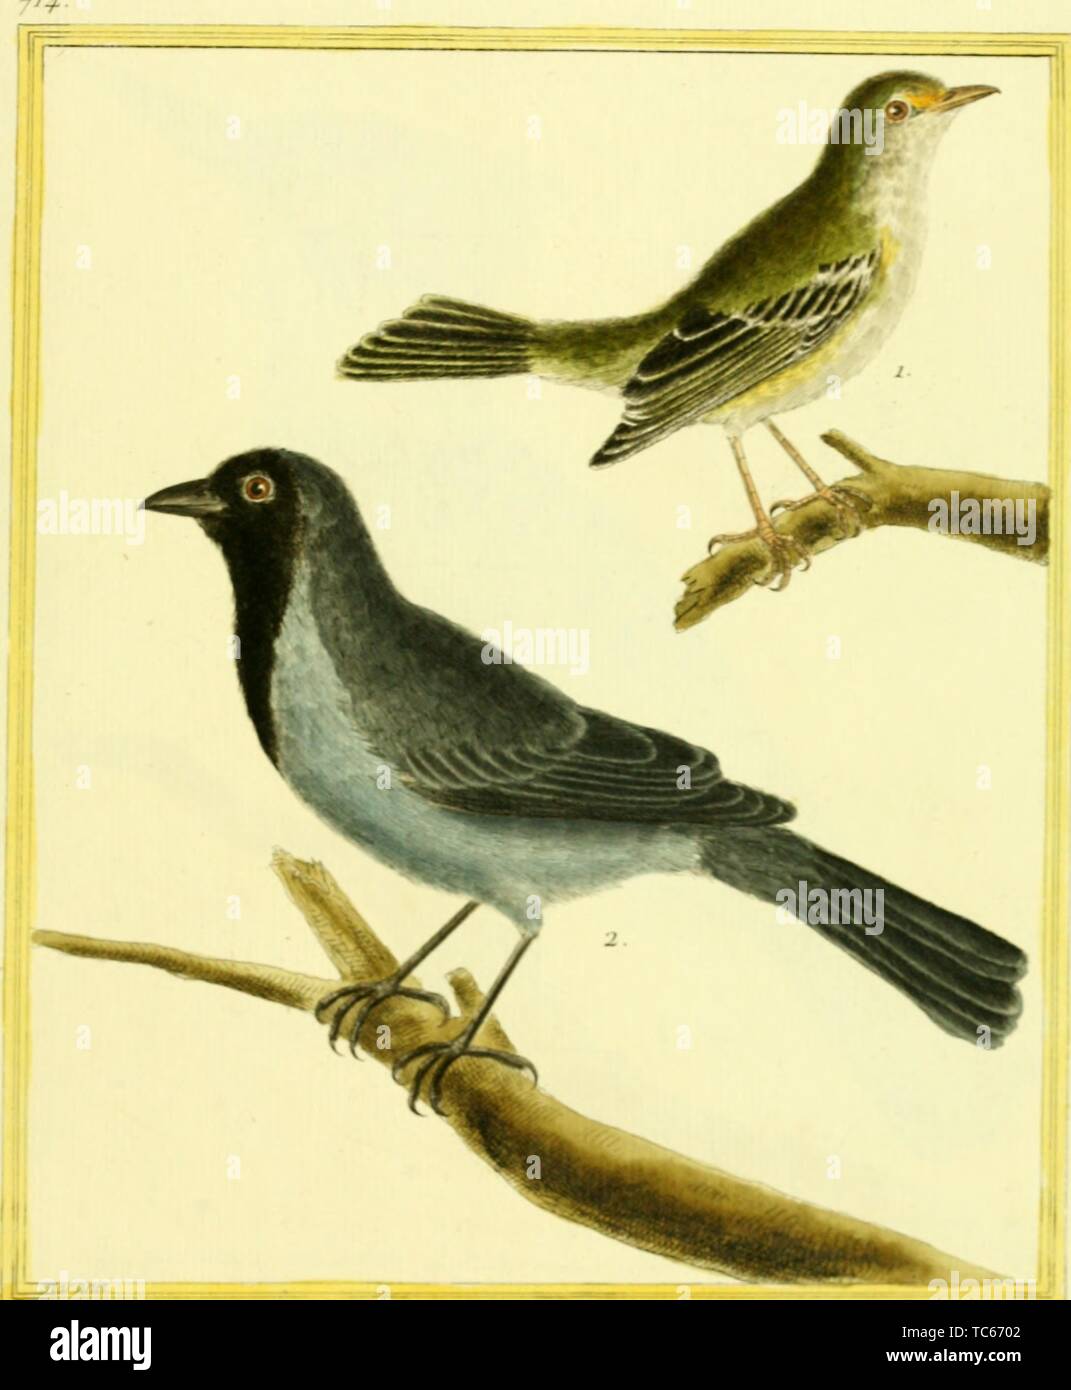 Engraved drawings of the Olive-green Tanager (Orthogonys chloricterus) and Black-chinned Antbird (Hypocnemoides melanopogon), from the book 'Planches enluminees Dhistoire naturelle' by Francois Nicolas, Louis Jean Marie Daubenton, and Edme-Louis Daubenton, 1765. Courtesy Internet Archive. () Stock Photo